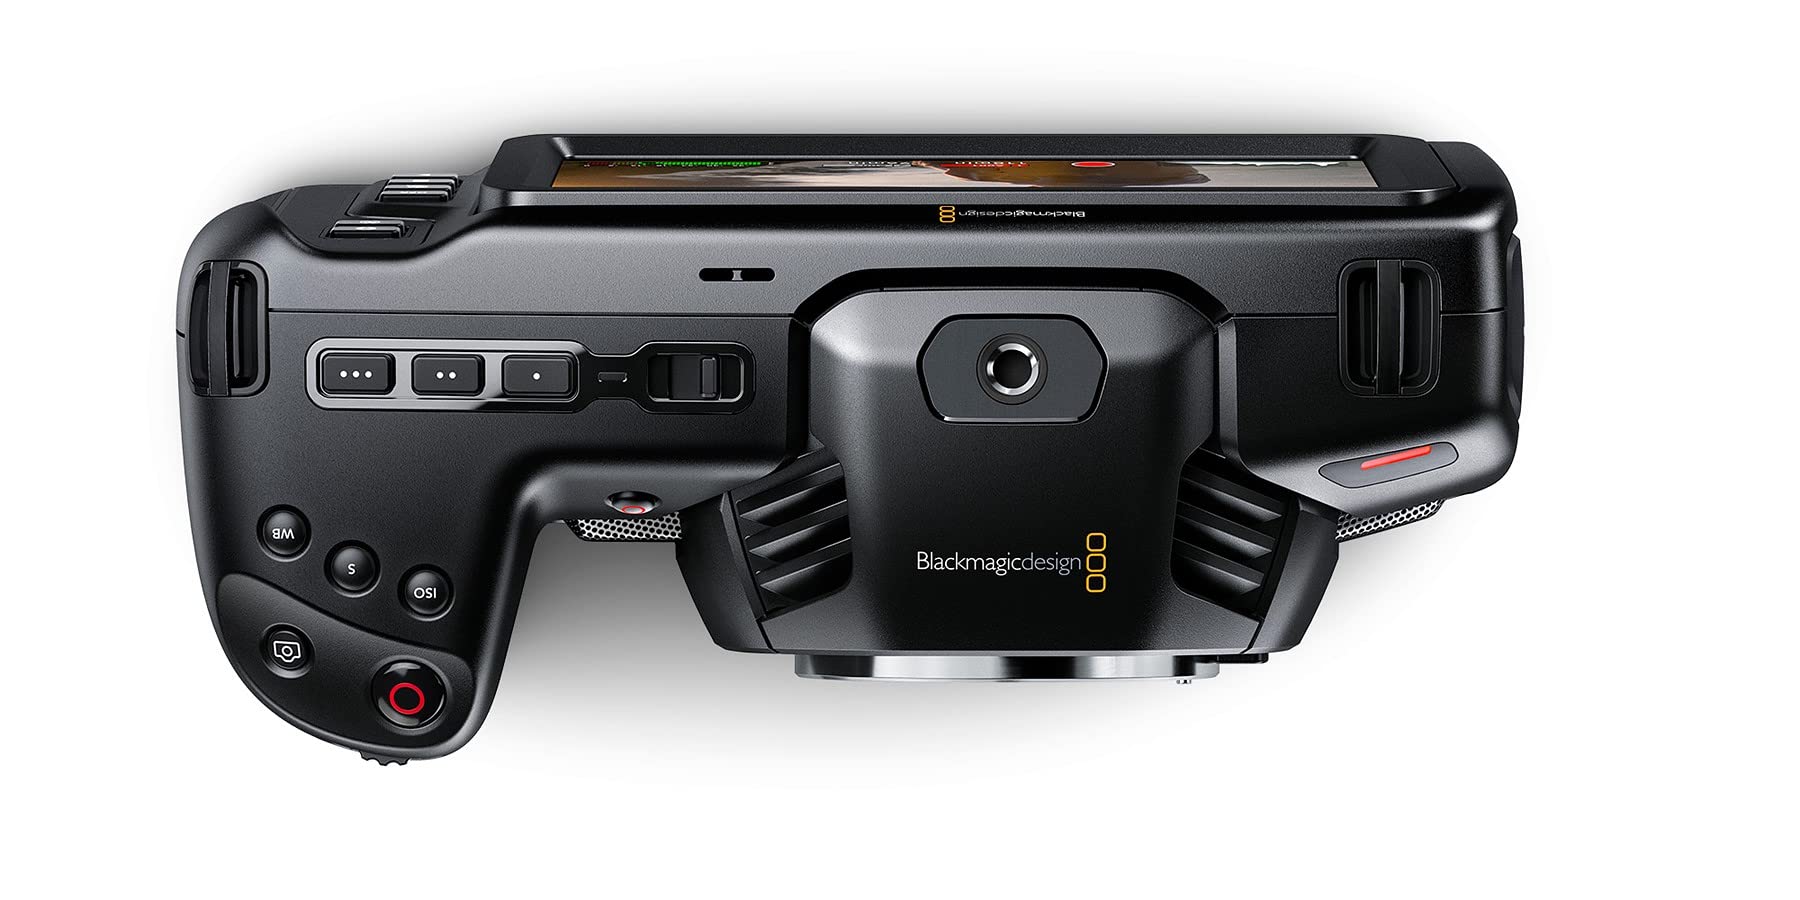 Blackmagic Design Pocket Cinema Camera 6K G2 (CINECAMPOCHDEF6K2) Power Bundle – Includes Two (2) Additional NP-F570 Batteries, Dual Battery Charger, and SolidSignal Microfiber Cloth